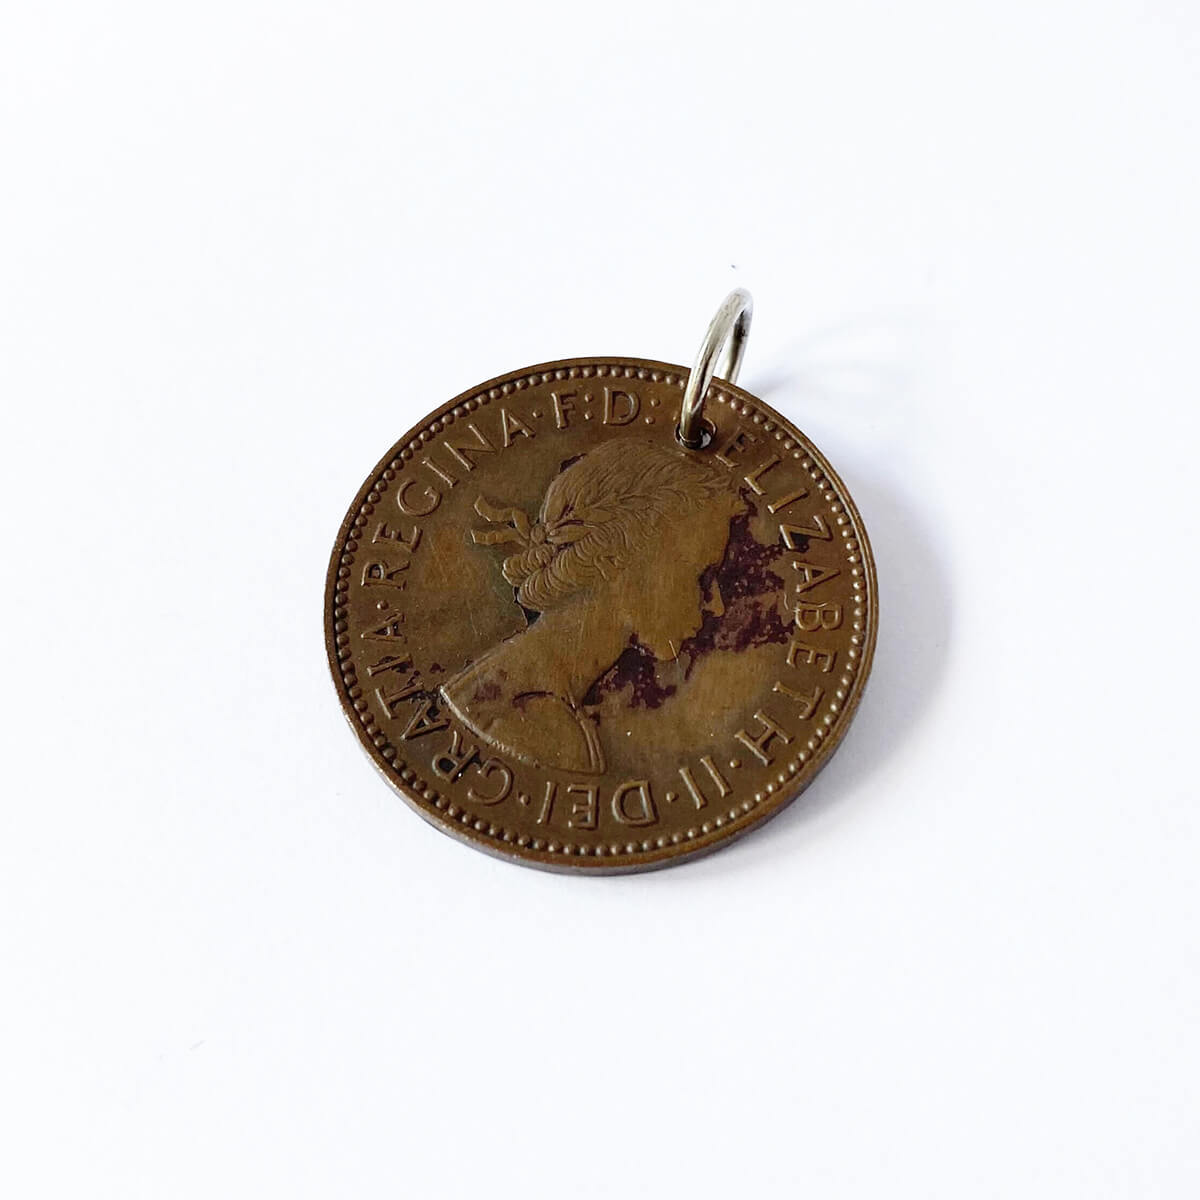 Vintage 1950s British coin charm Halfpenny Queen Elizabeth with enamel flowers pendant from Charmarama